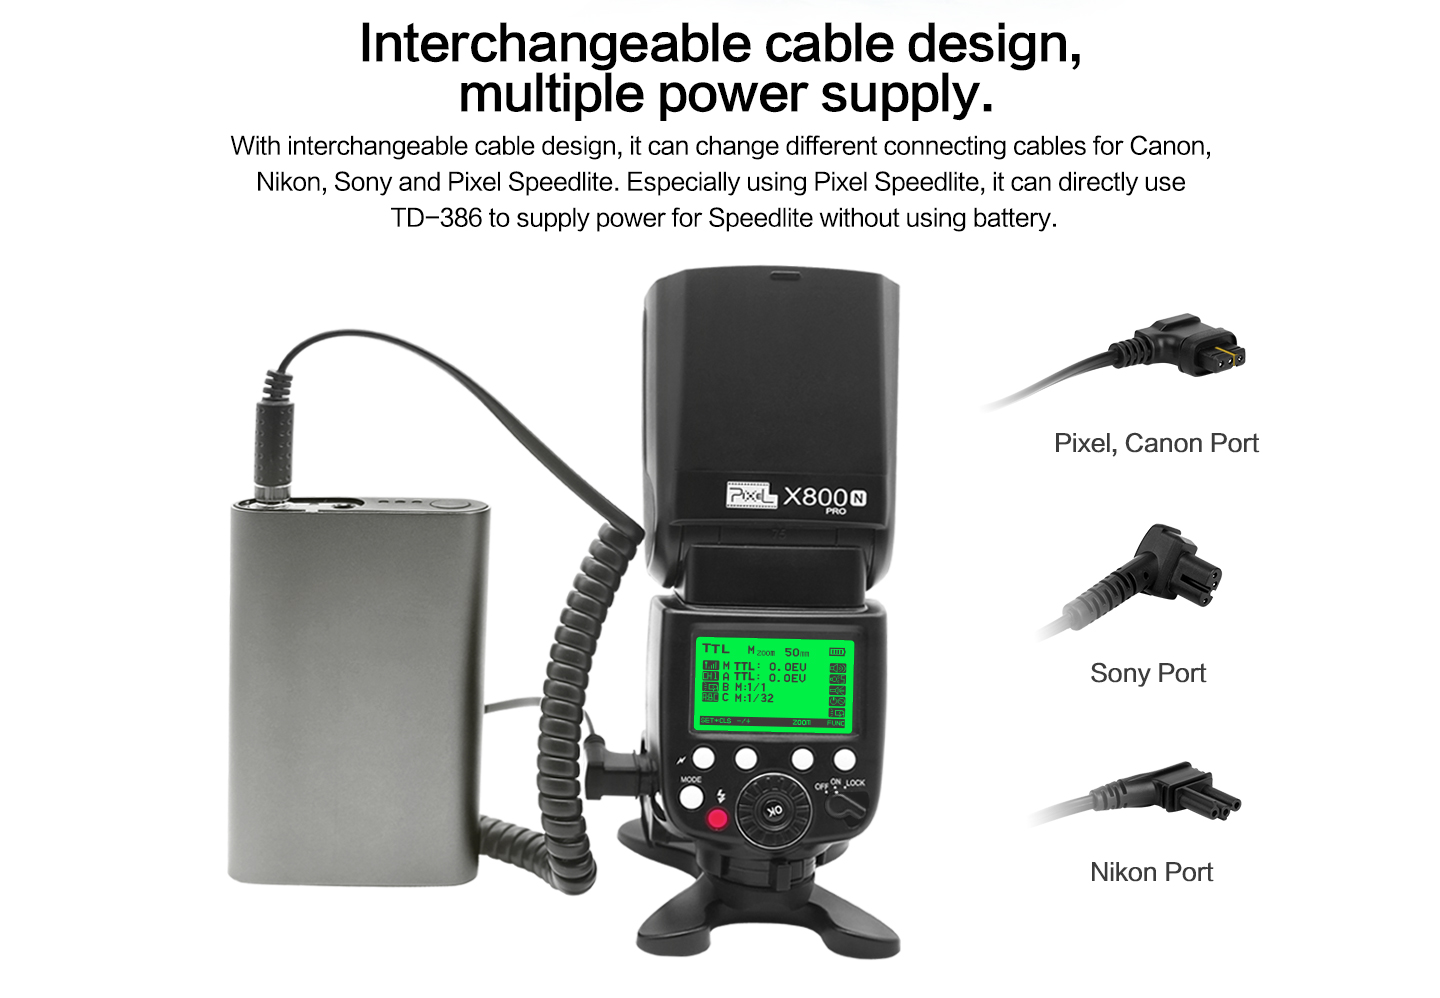 lnterchangeable cable design, multiple power supply